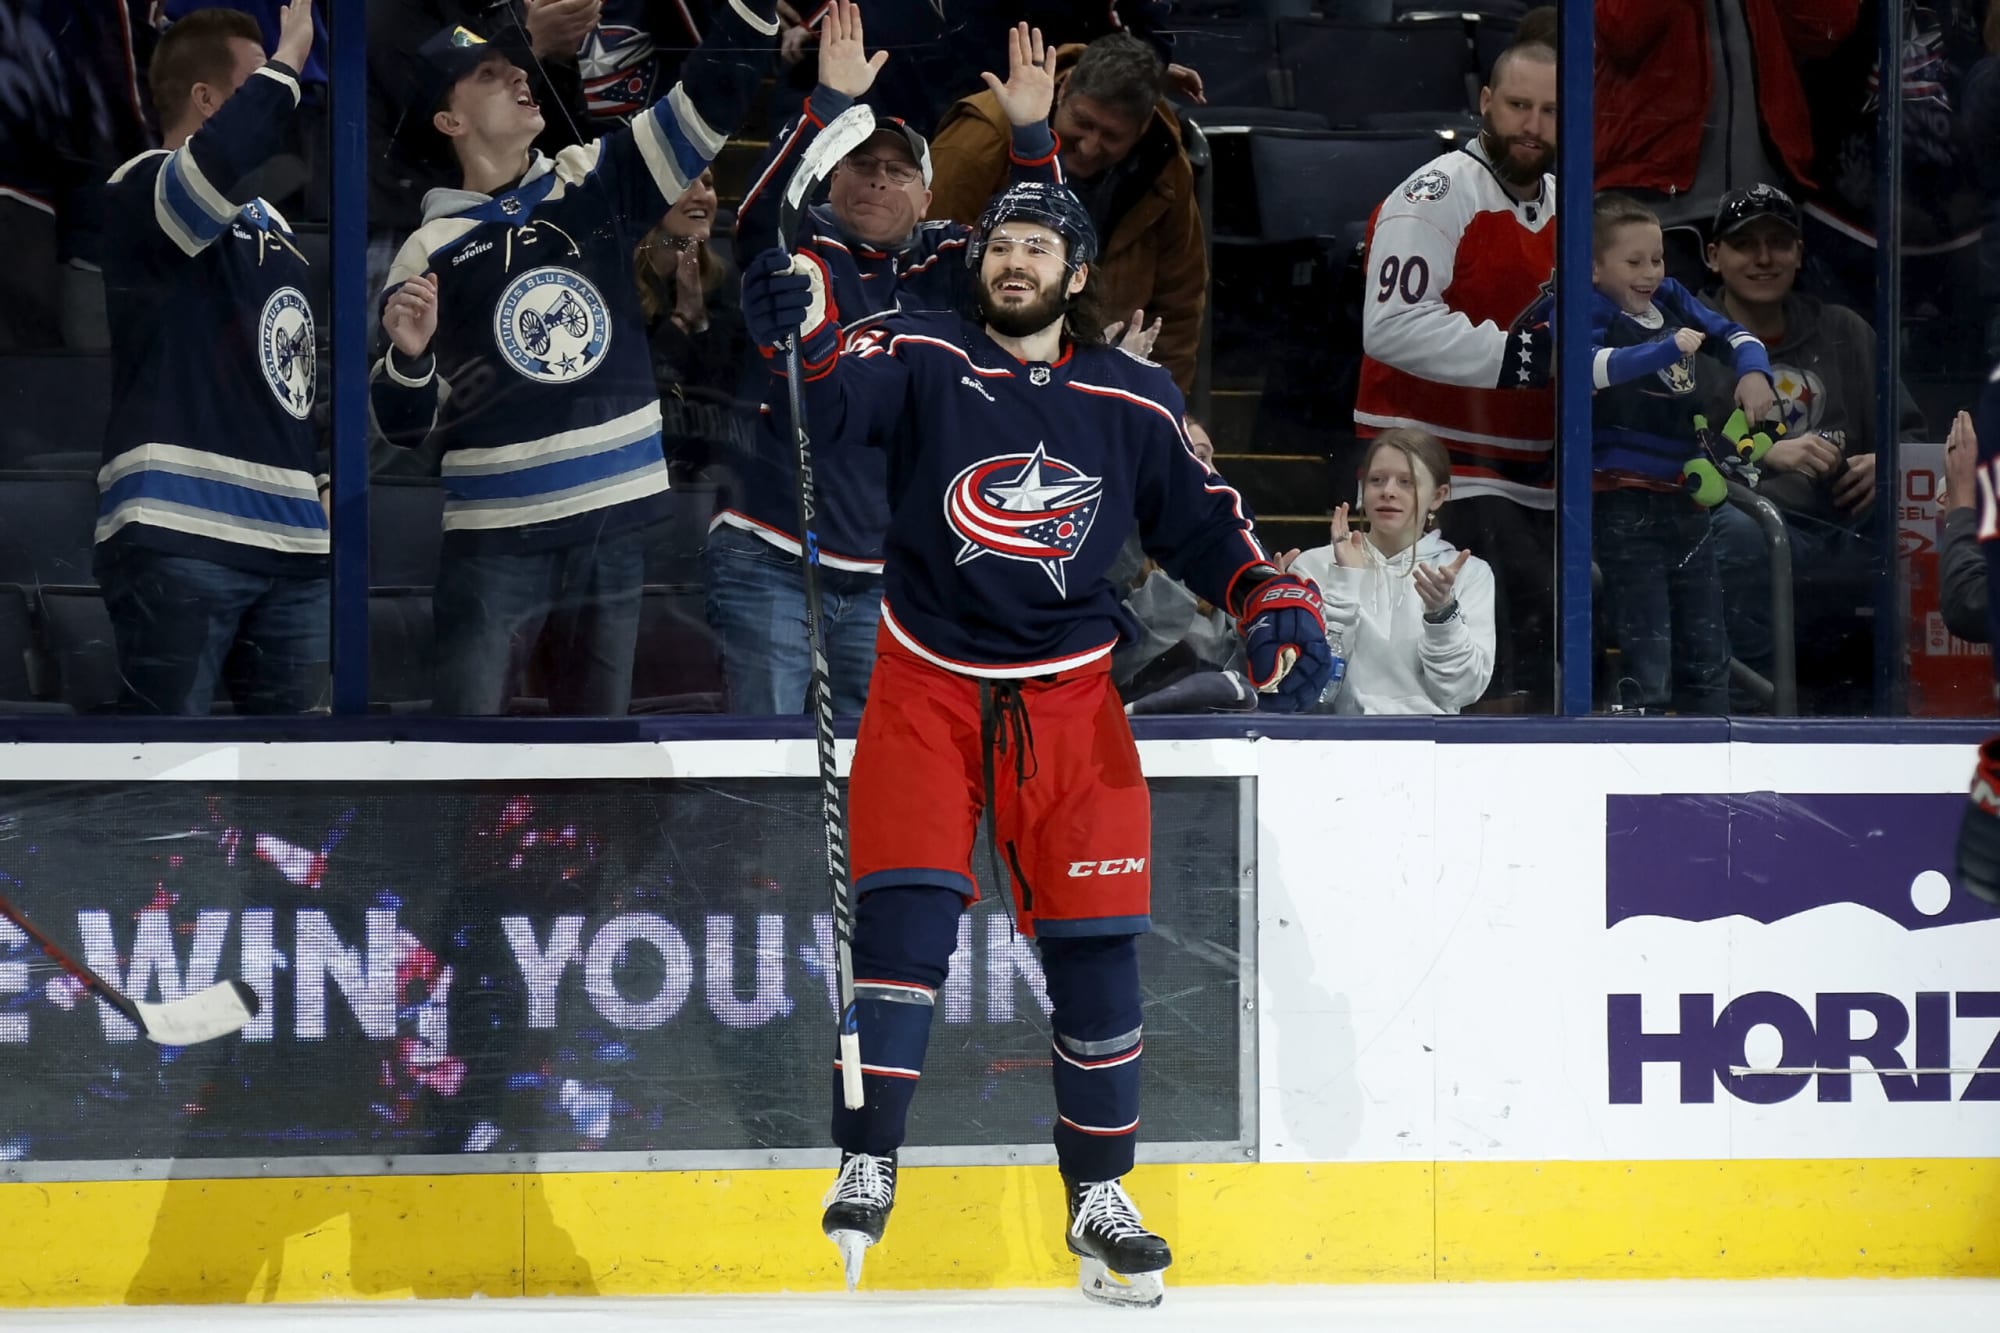 Kirill Marchenko hat trick for Blue Jackets against Hurricanes